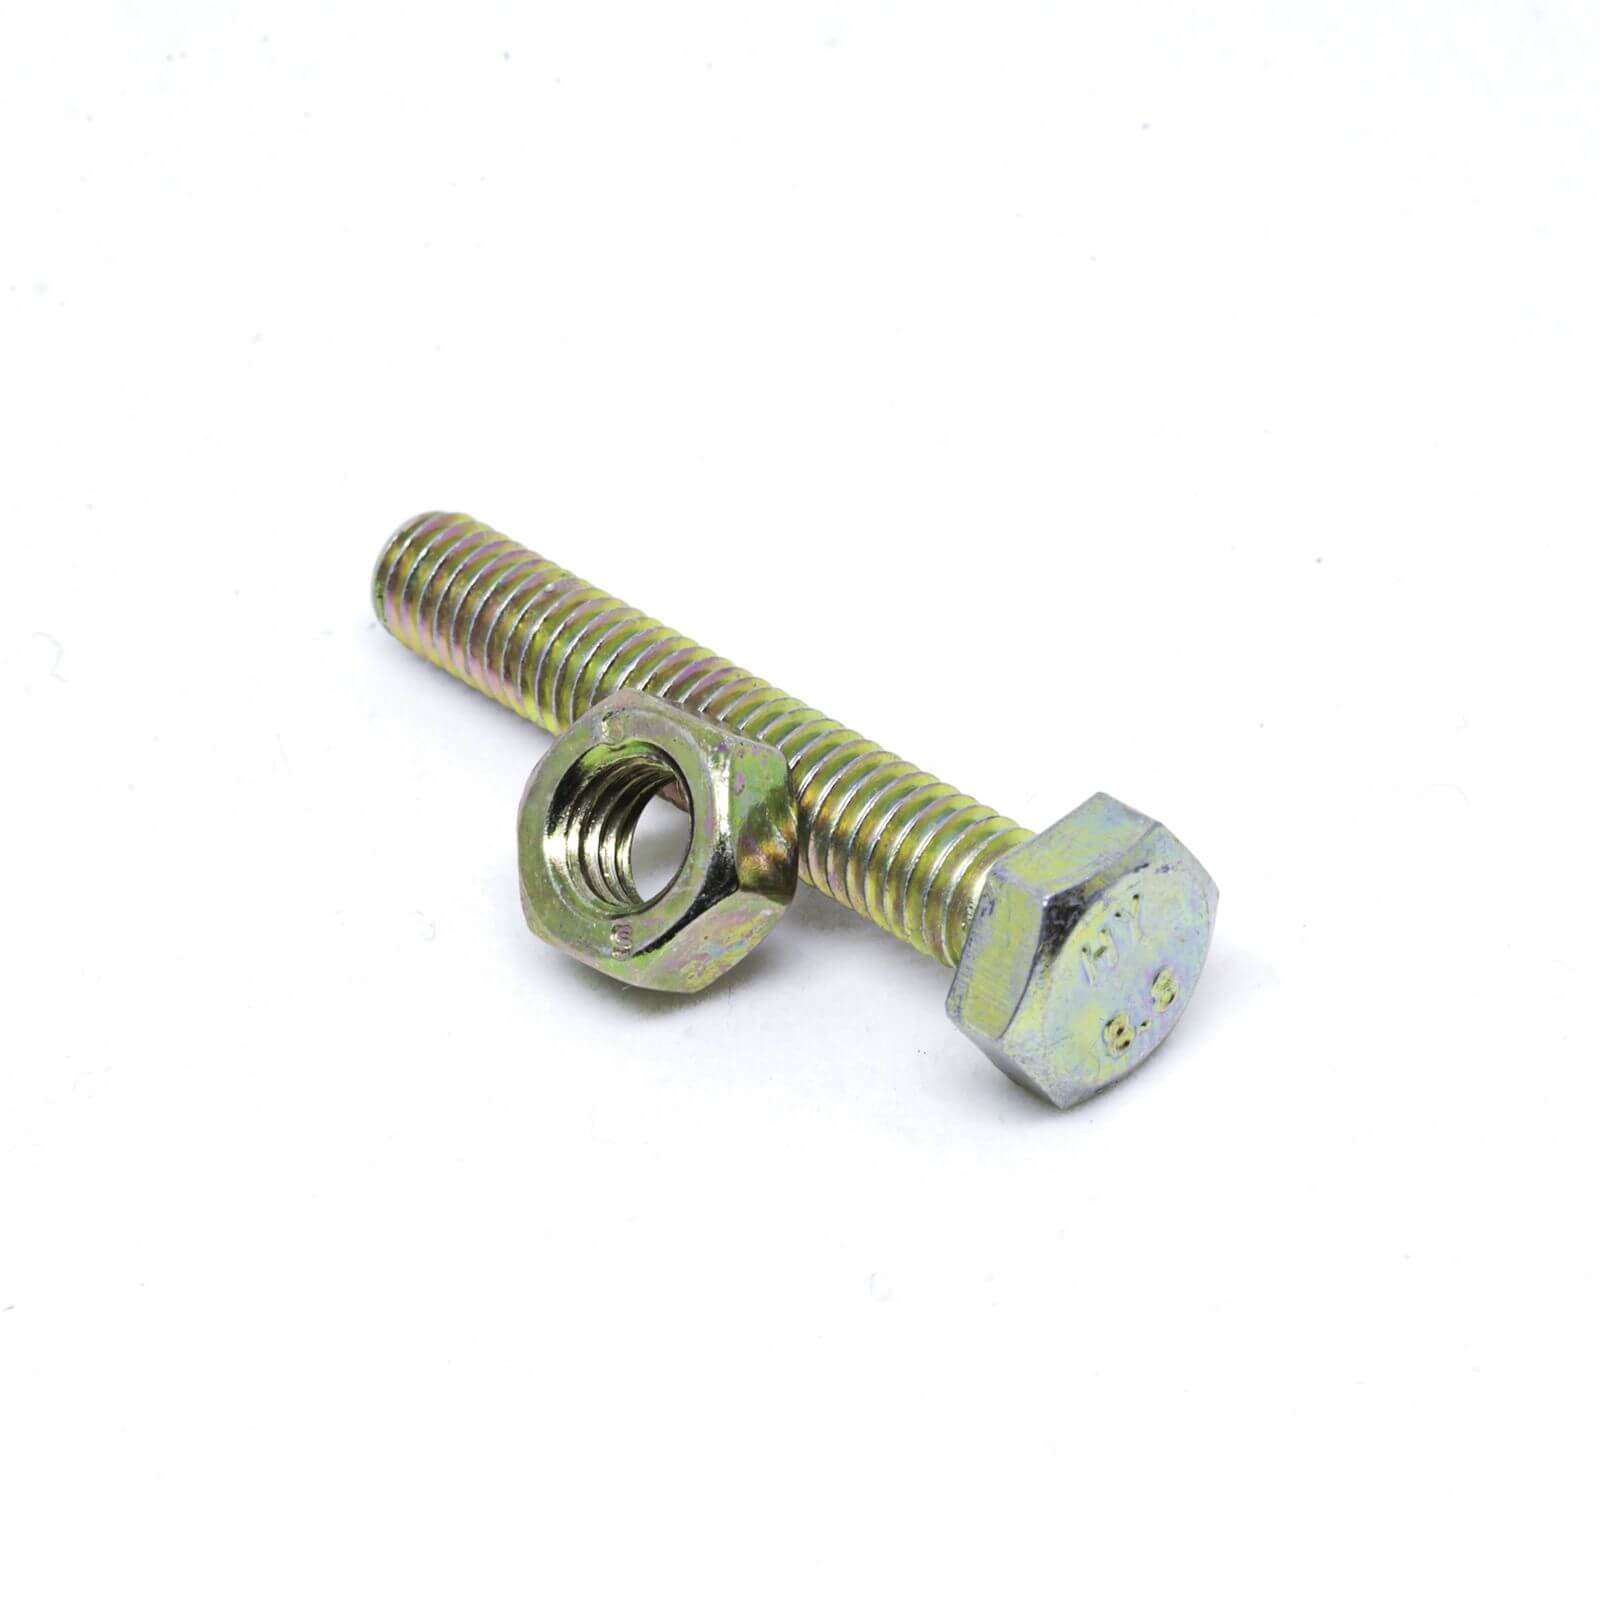 Pinnacle High Tensile Bolts and Nuts - 8 x 60mm - 3 Pack